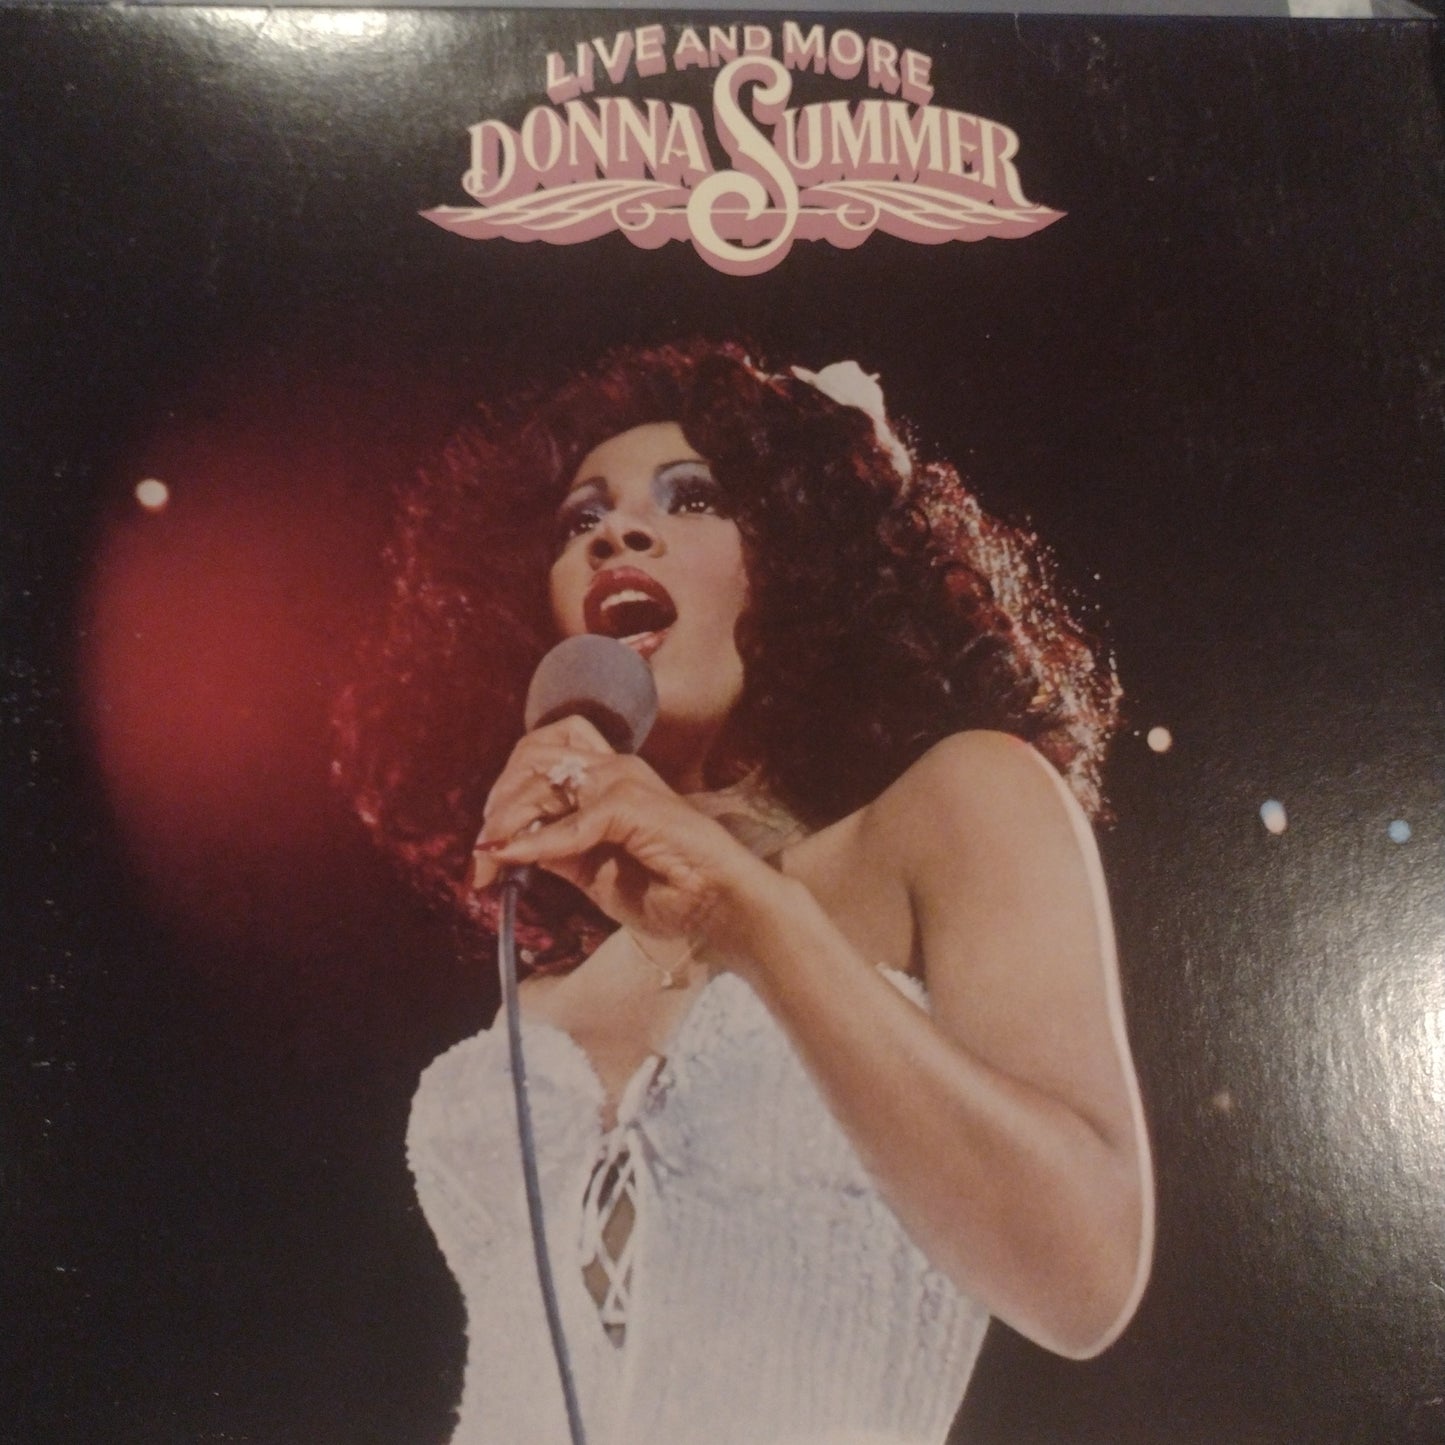 Live and more Donna summer